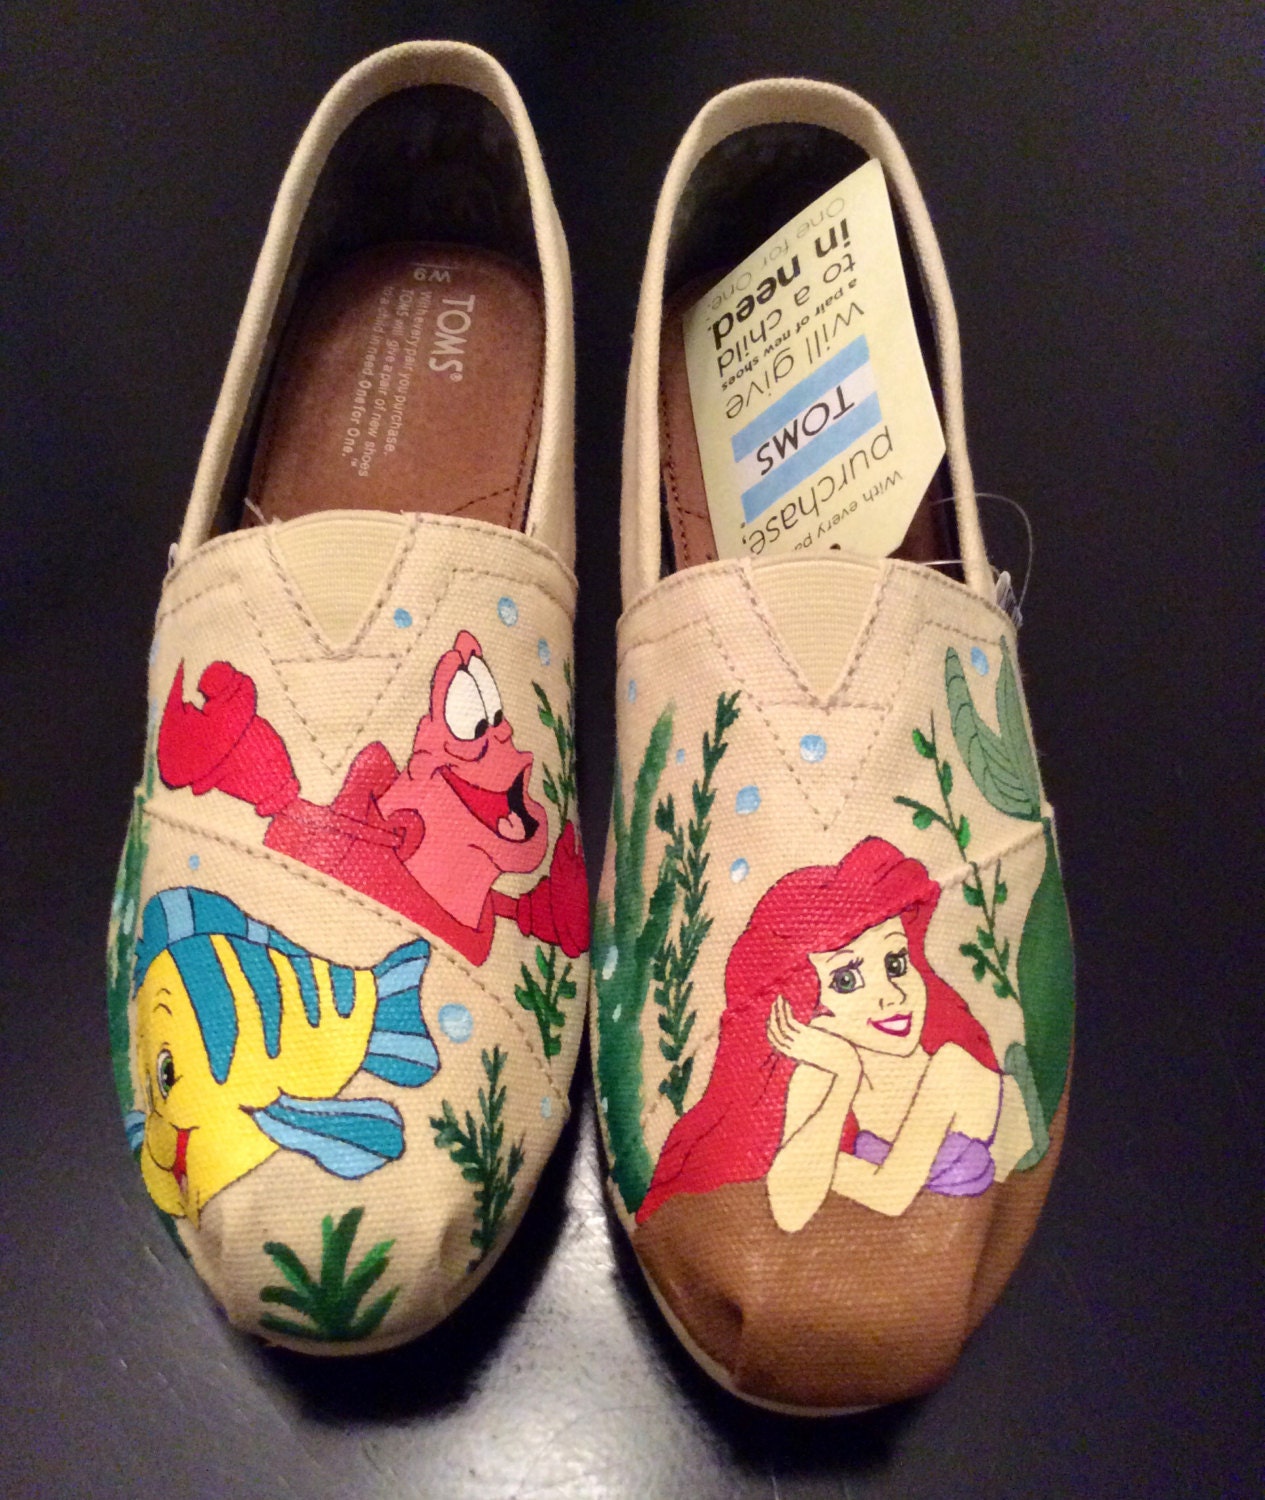 TOMS Women's Mermaid Canvas Slip-On Shoes by CustomShoesbySabrina